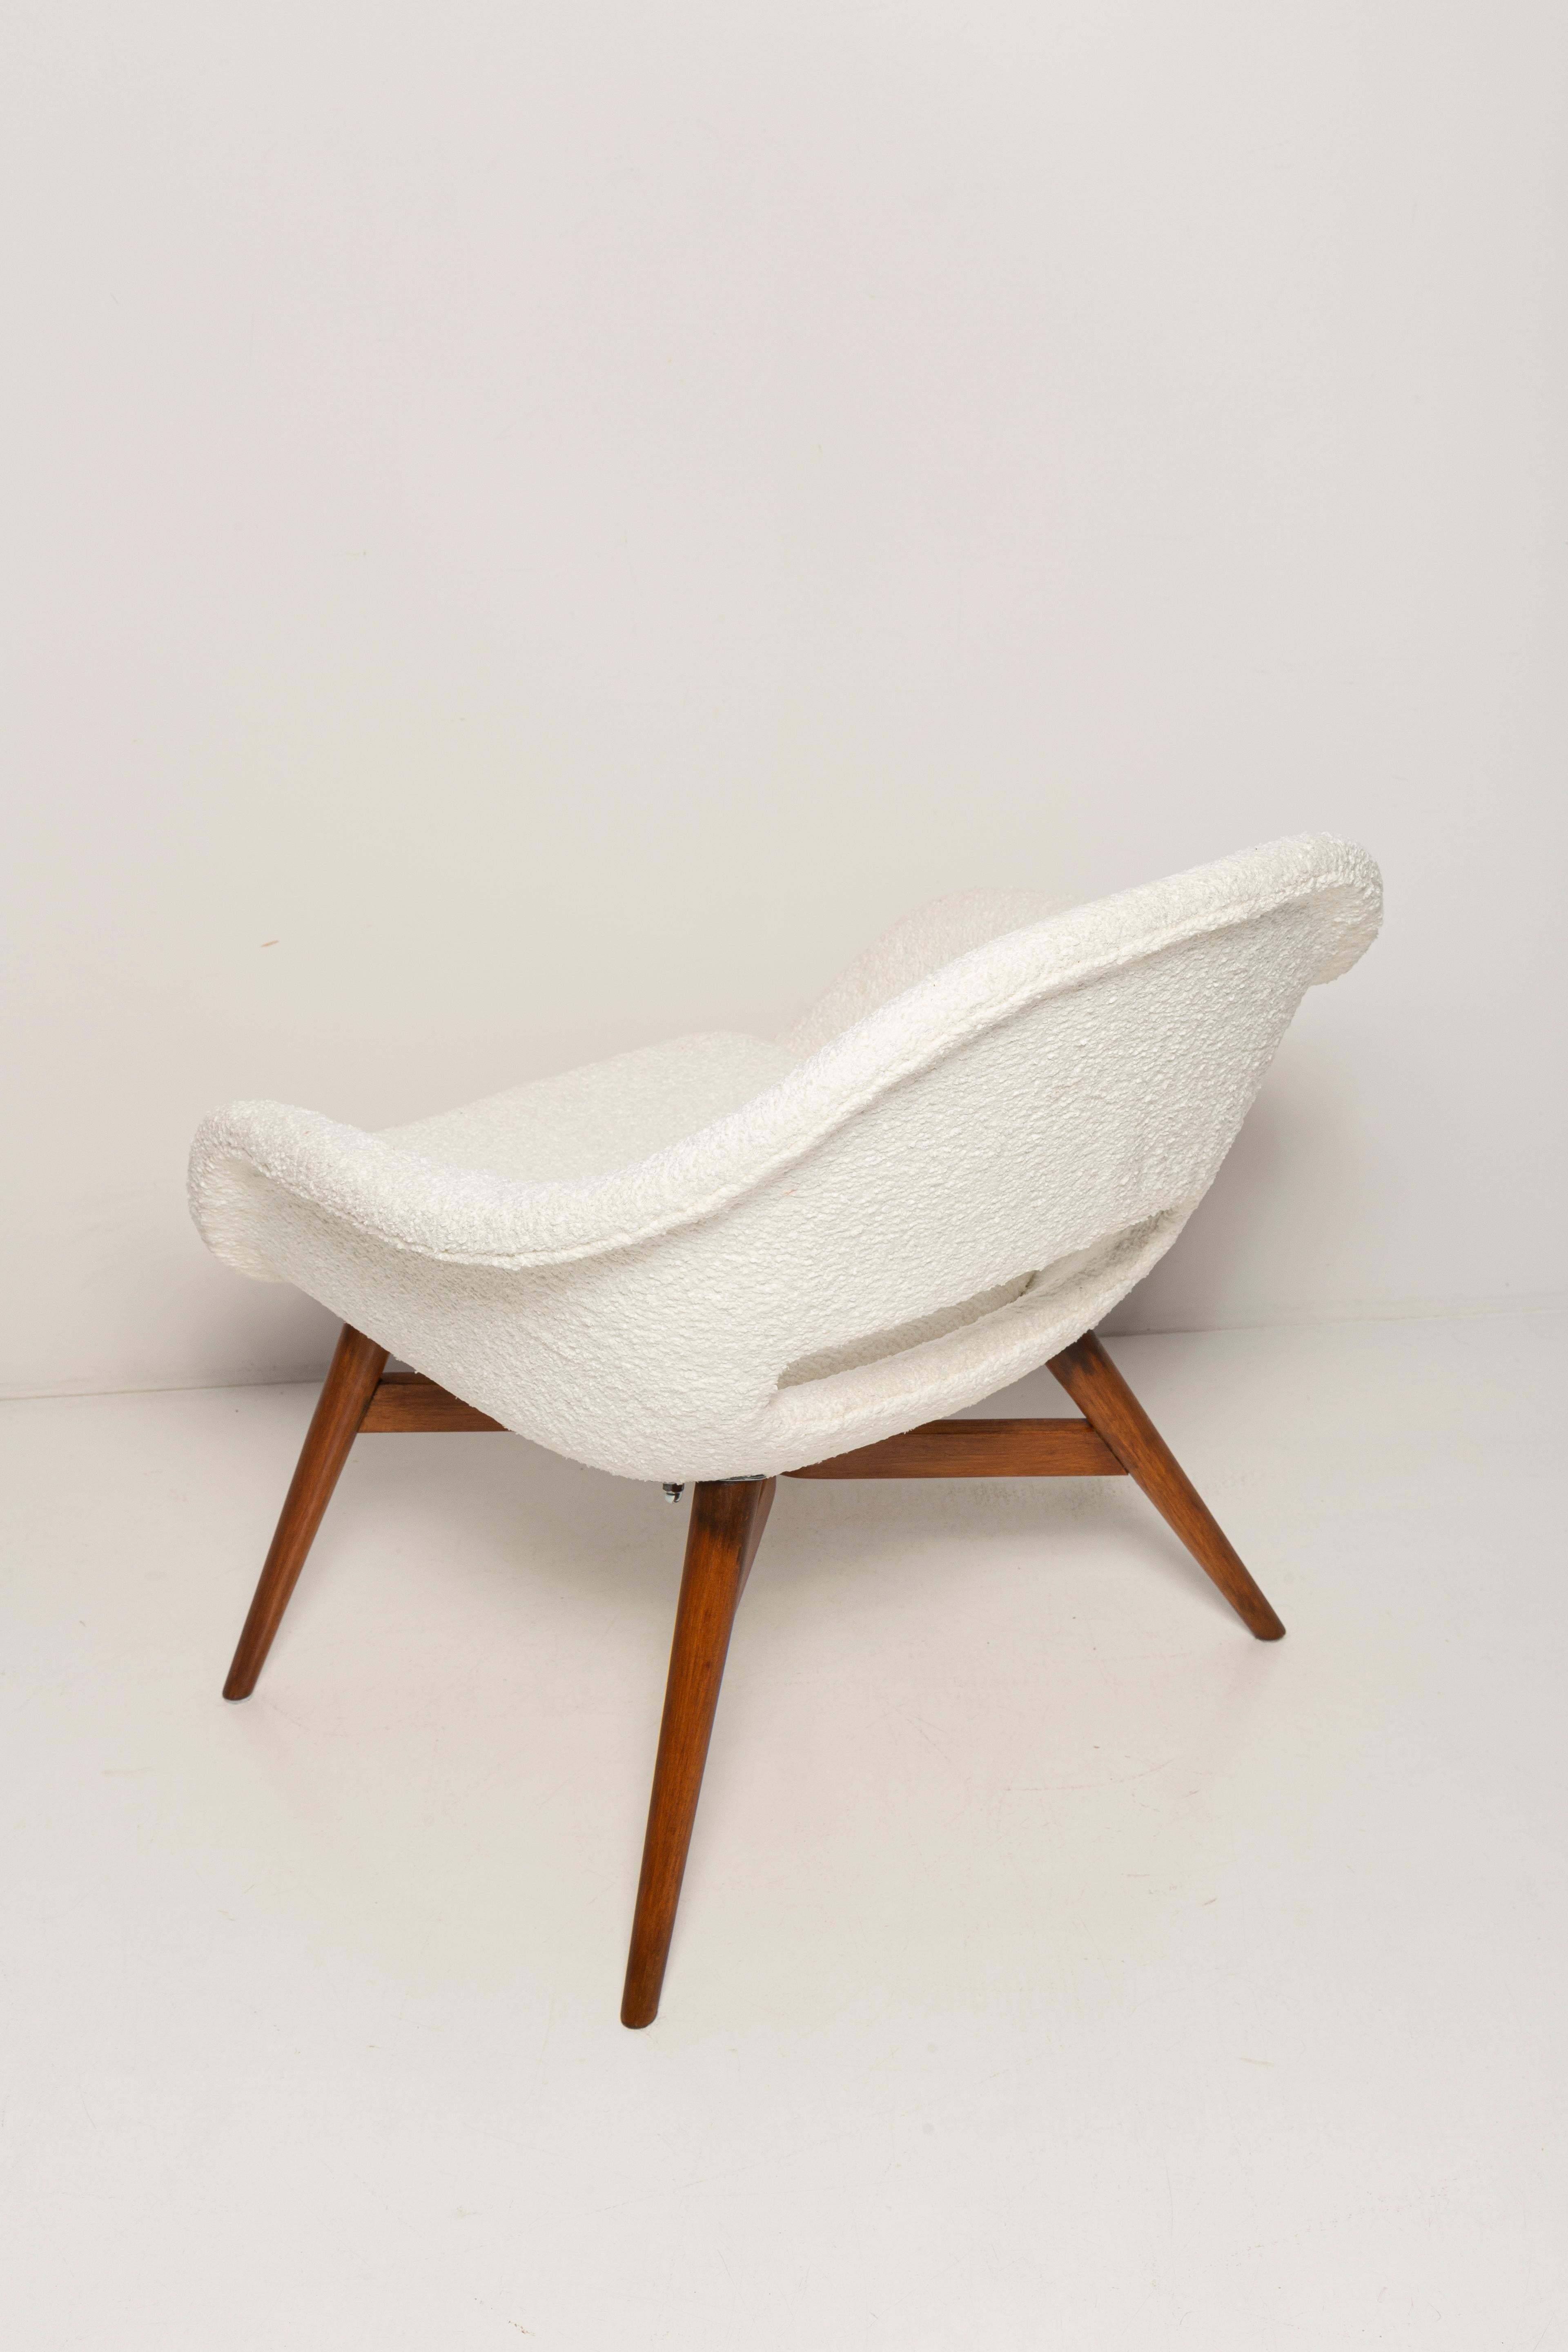 Set of 2 Mid Century White Boucle Shell Chairs, M Navratil, Czechoslovakia, 1960 For Sale 4